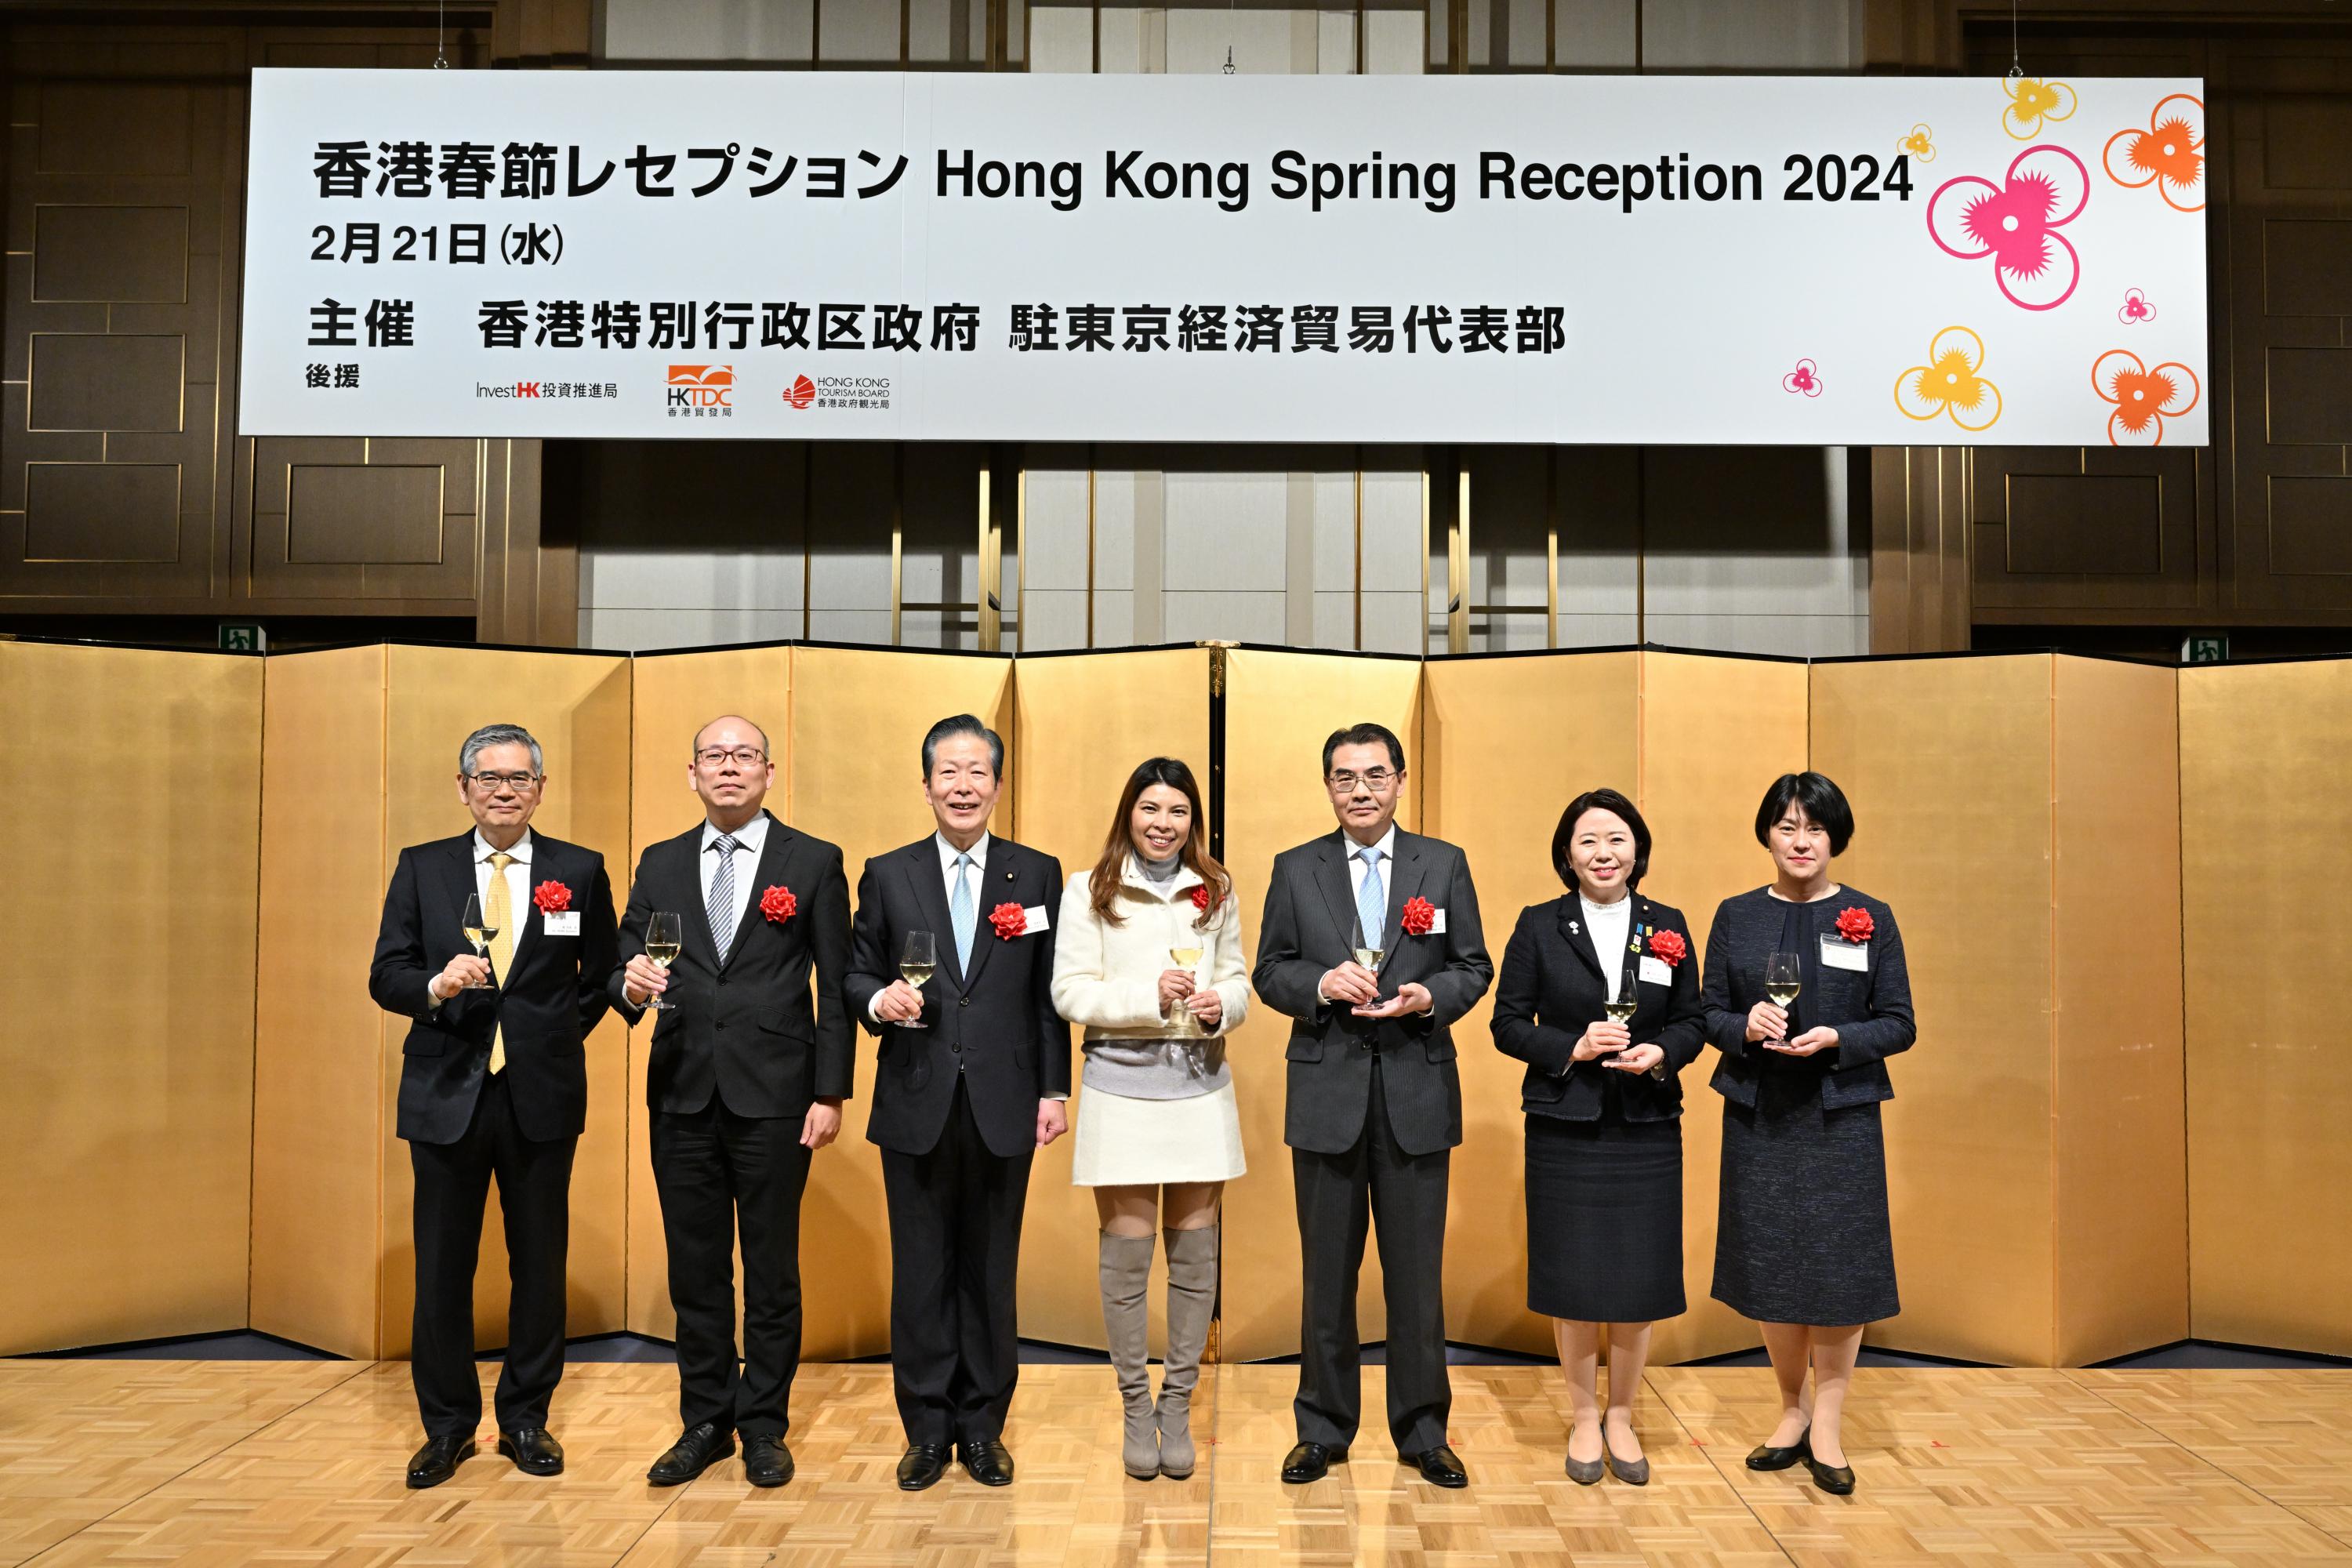 The Hong Kong Economic and Trade Office (Tokyo) (Tokyo ETO) organised a spring reception in Tokyo today (February 21). Photo shows the Principal Hong Kong Economic and Trade Representative (Tokyo), Miss Winsome Au (centre), with (from left) the Regional Director of Japan of the Hong Kong Tourism Board, Mr Kazunori Hori; the Director, Japan, of the Hong Kong Trade Development Council, Mr Benjamin Yau; the Chief Representative of Japan's Komeito Party, Mr Natsuo Yamaguchi; the Chinese Ambassador to Japan, Mr Wu Jianghao; the Secretary General of Japan-Hong Kong Parliamentarian League, Ms Hanako Jimi; and the Head of Business and Talent Attraction/Investment Promotion of Tokyo ETO, Ms Kiyoko Hashiba.